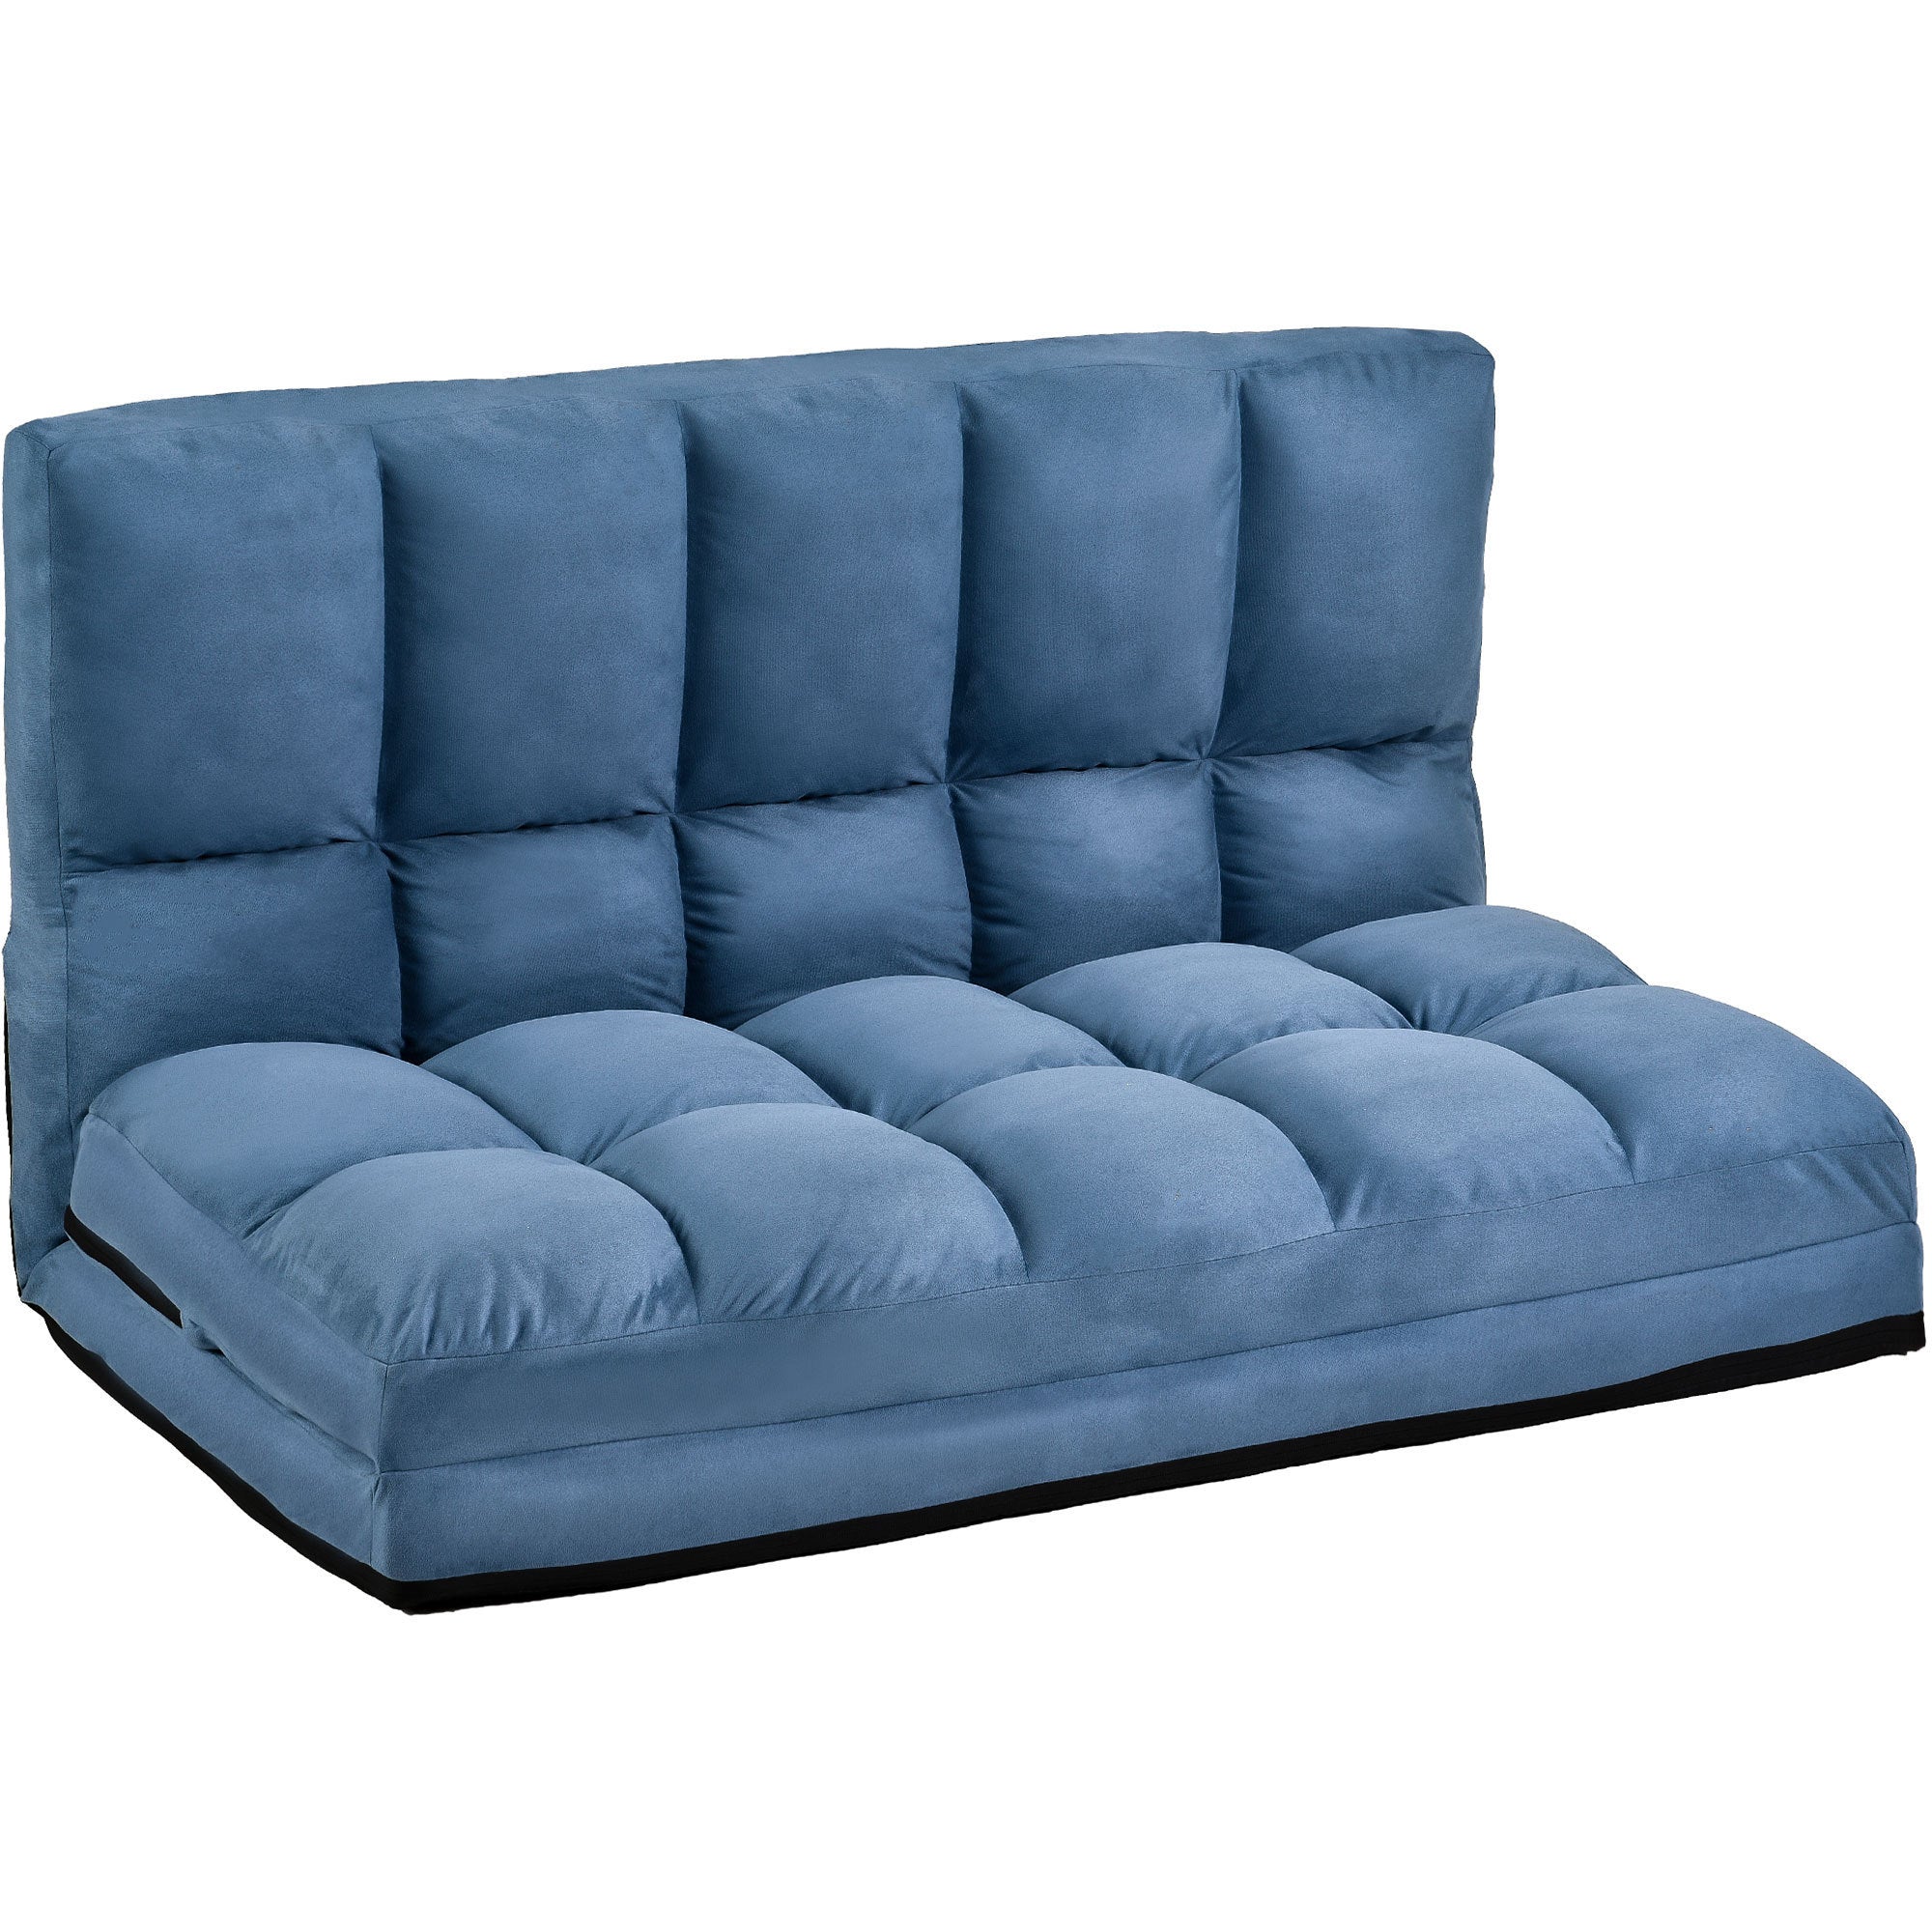 Double Chaise Lounge Sofa Floor and Living Room Sofa with Two Pillows (Blue)